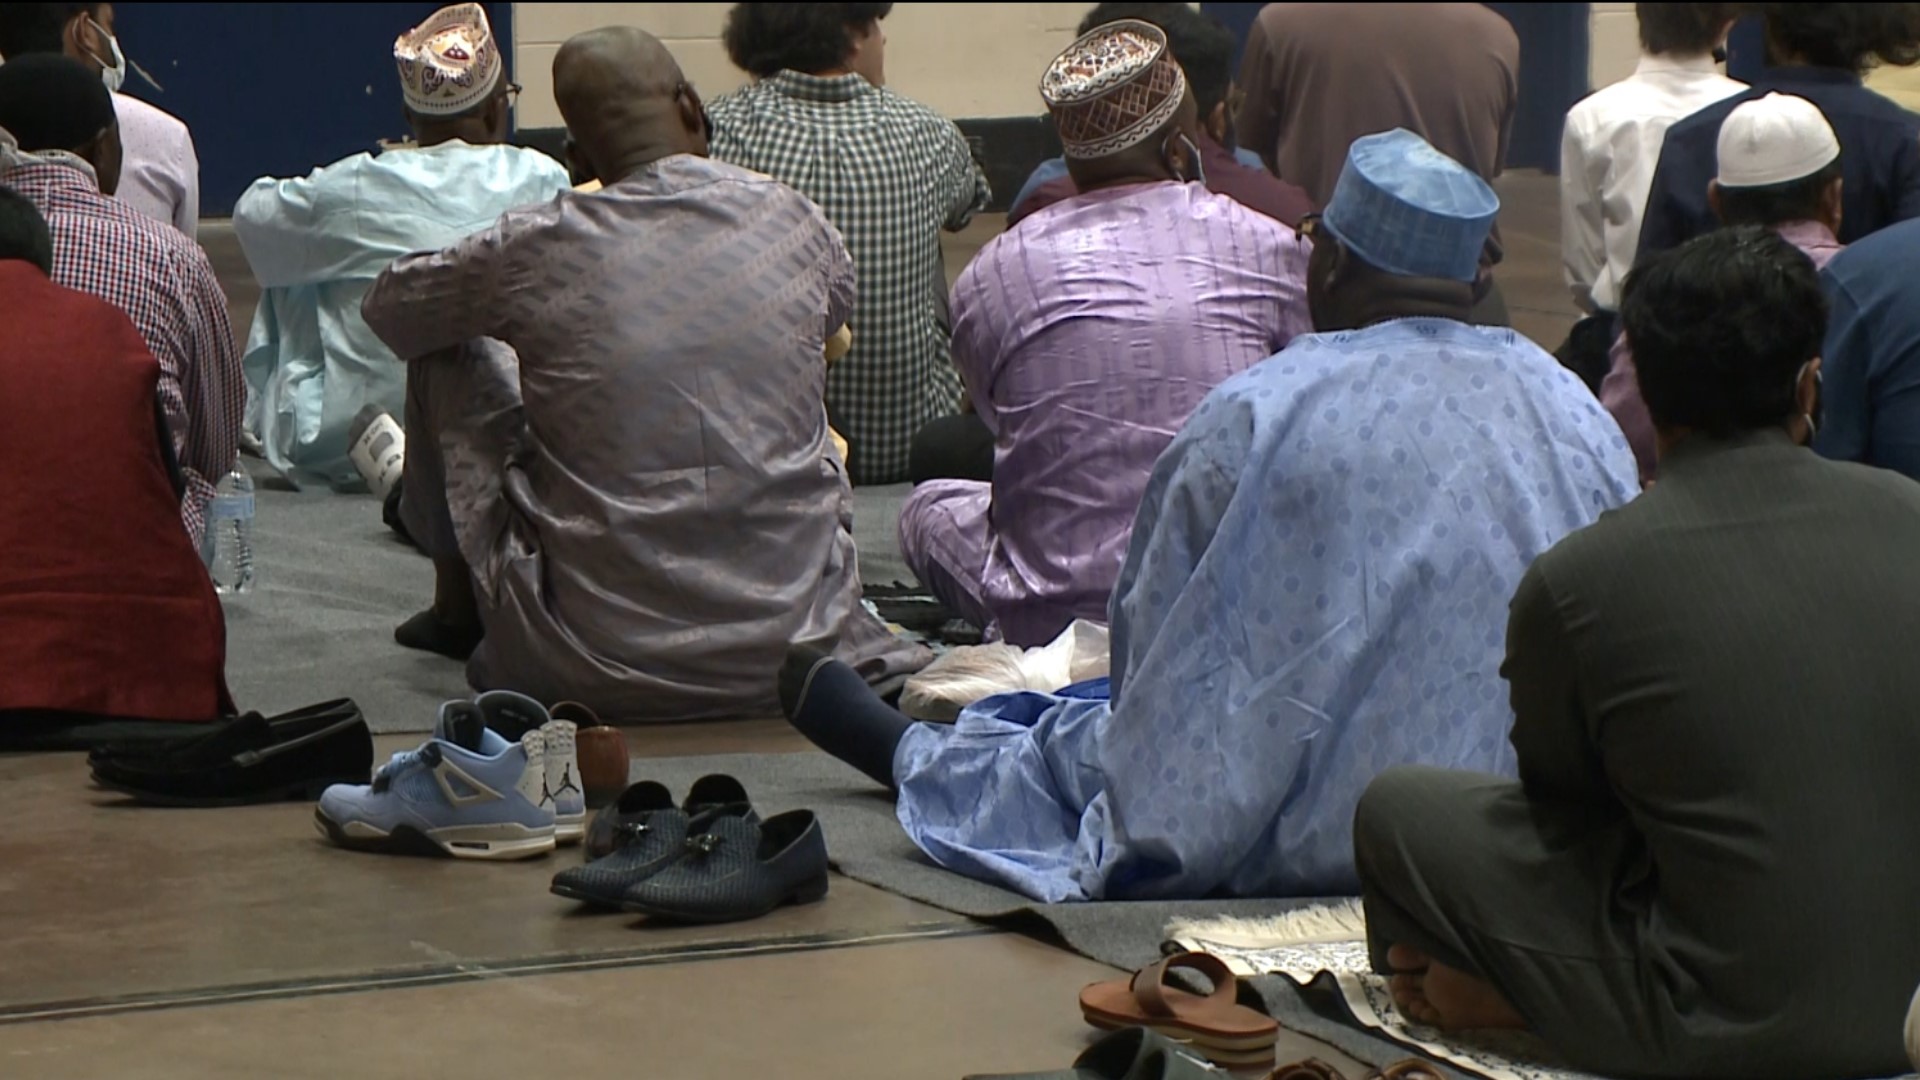 In Connecticut, thousands gathered at the XL Center in Downtown Hartford Saturday morning to celebrate with communal prayer.